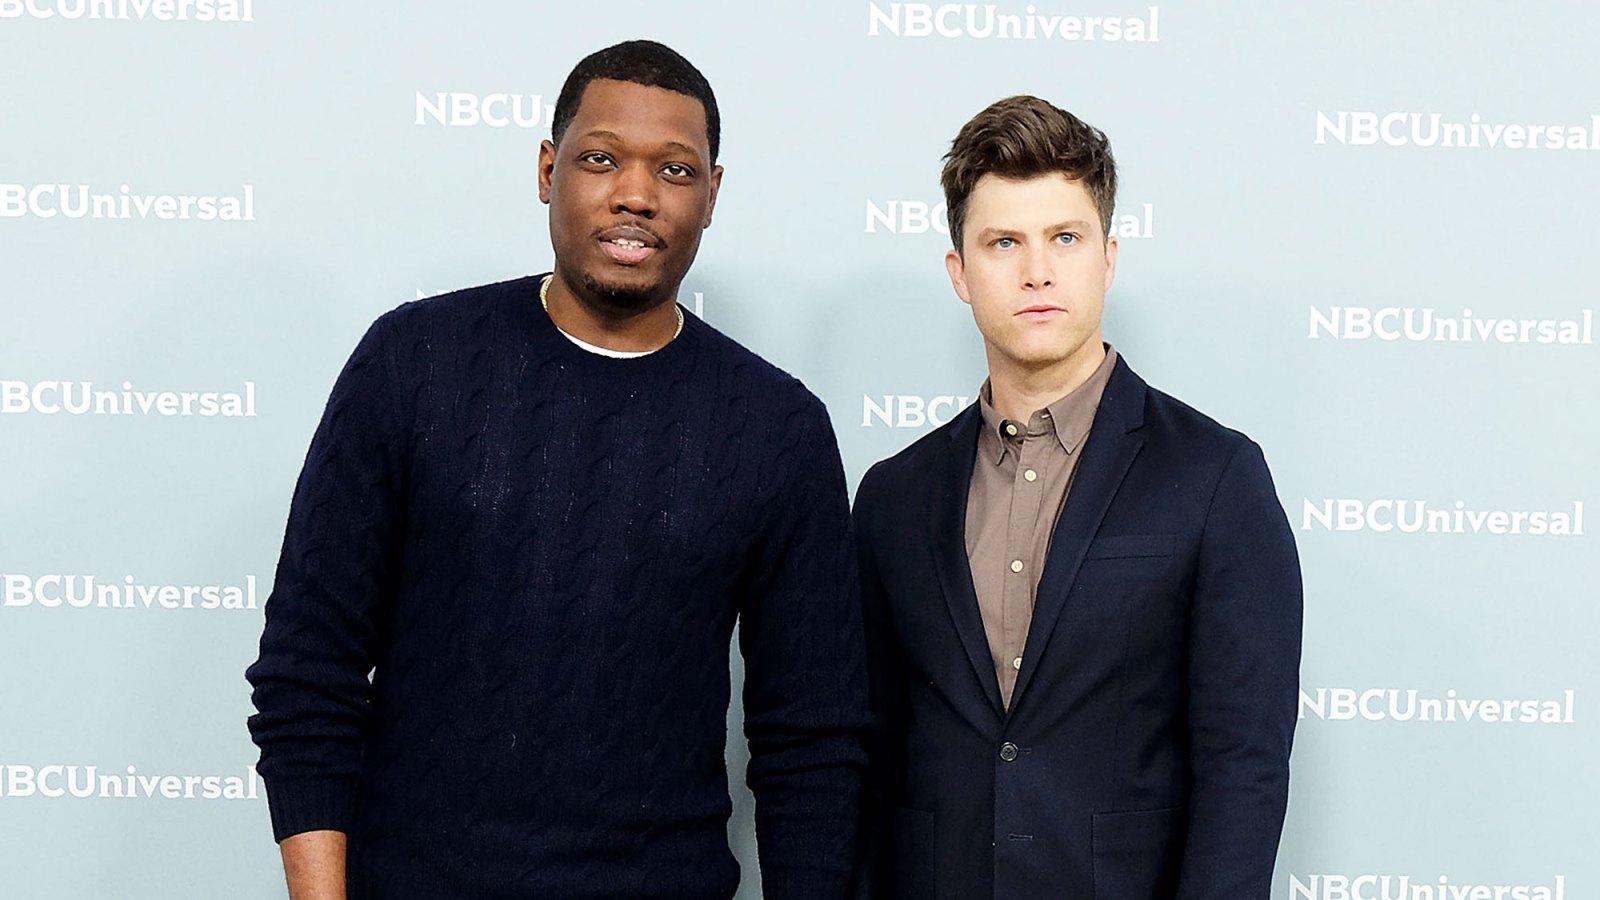 Colin-Jost-and-Michael-Che-25-Things-You-Dont-Know-About-Us-Michael-Che-and-Colin-Jost